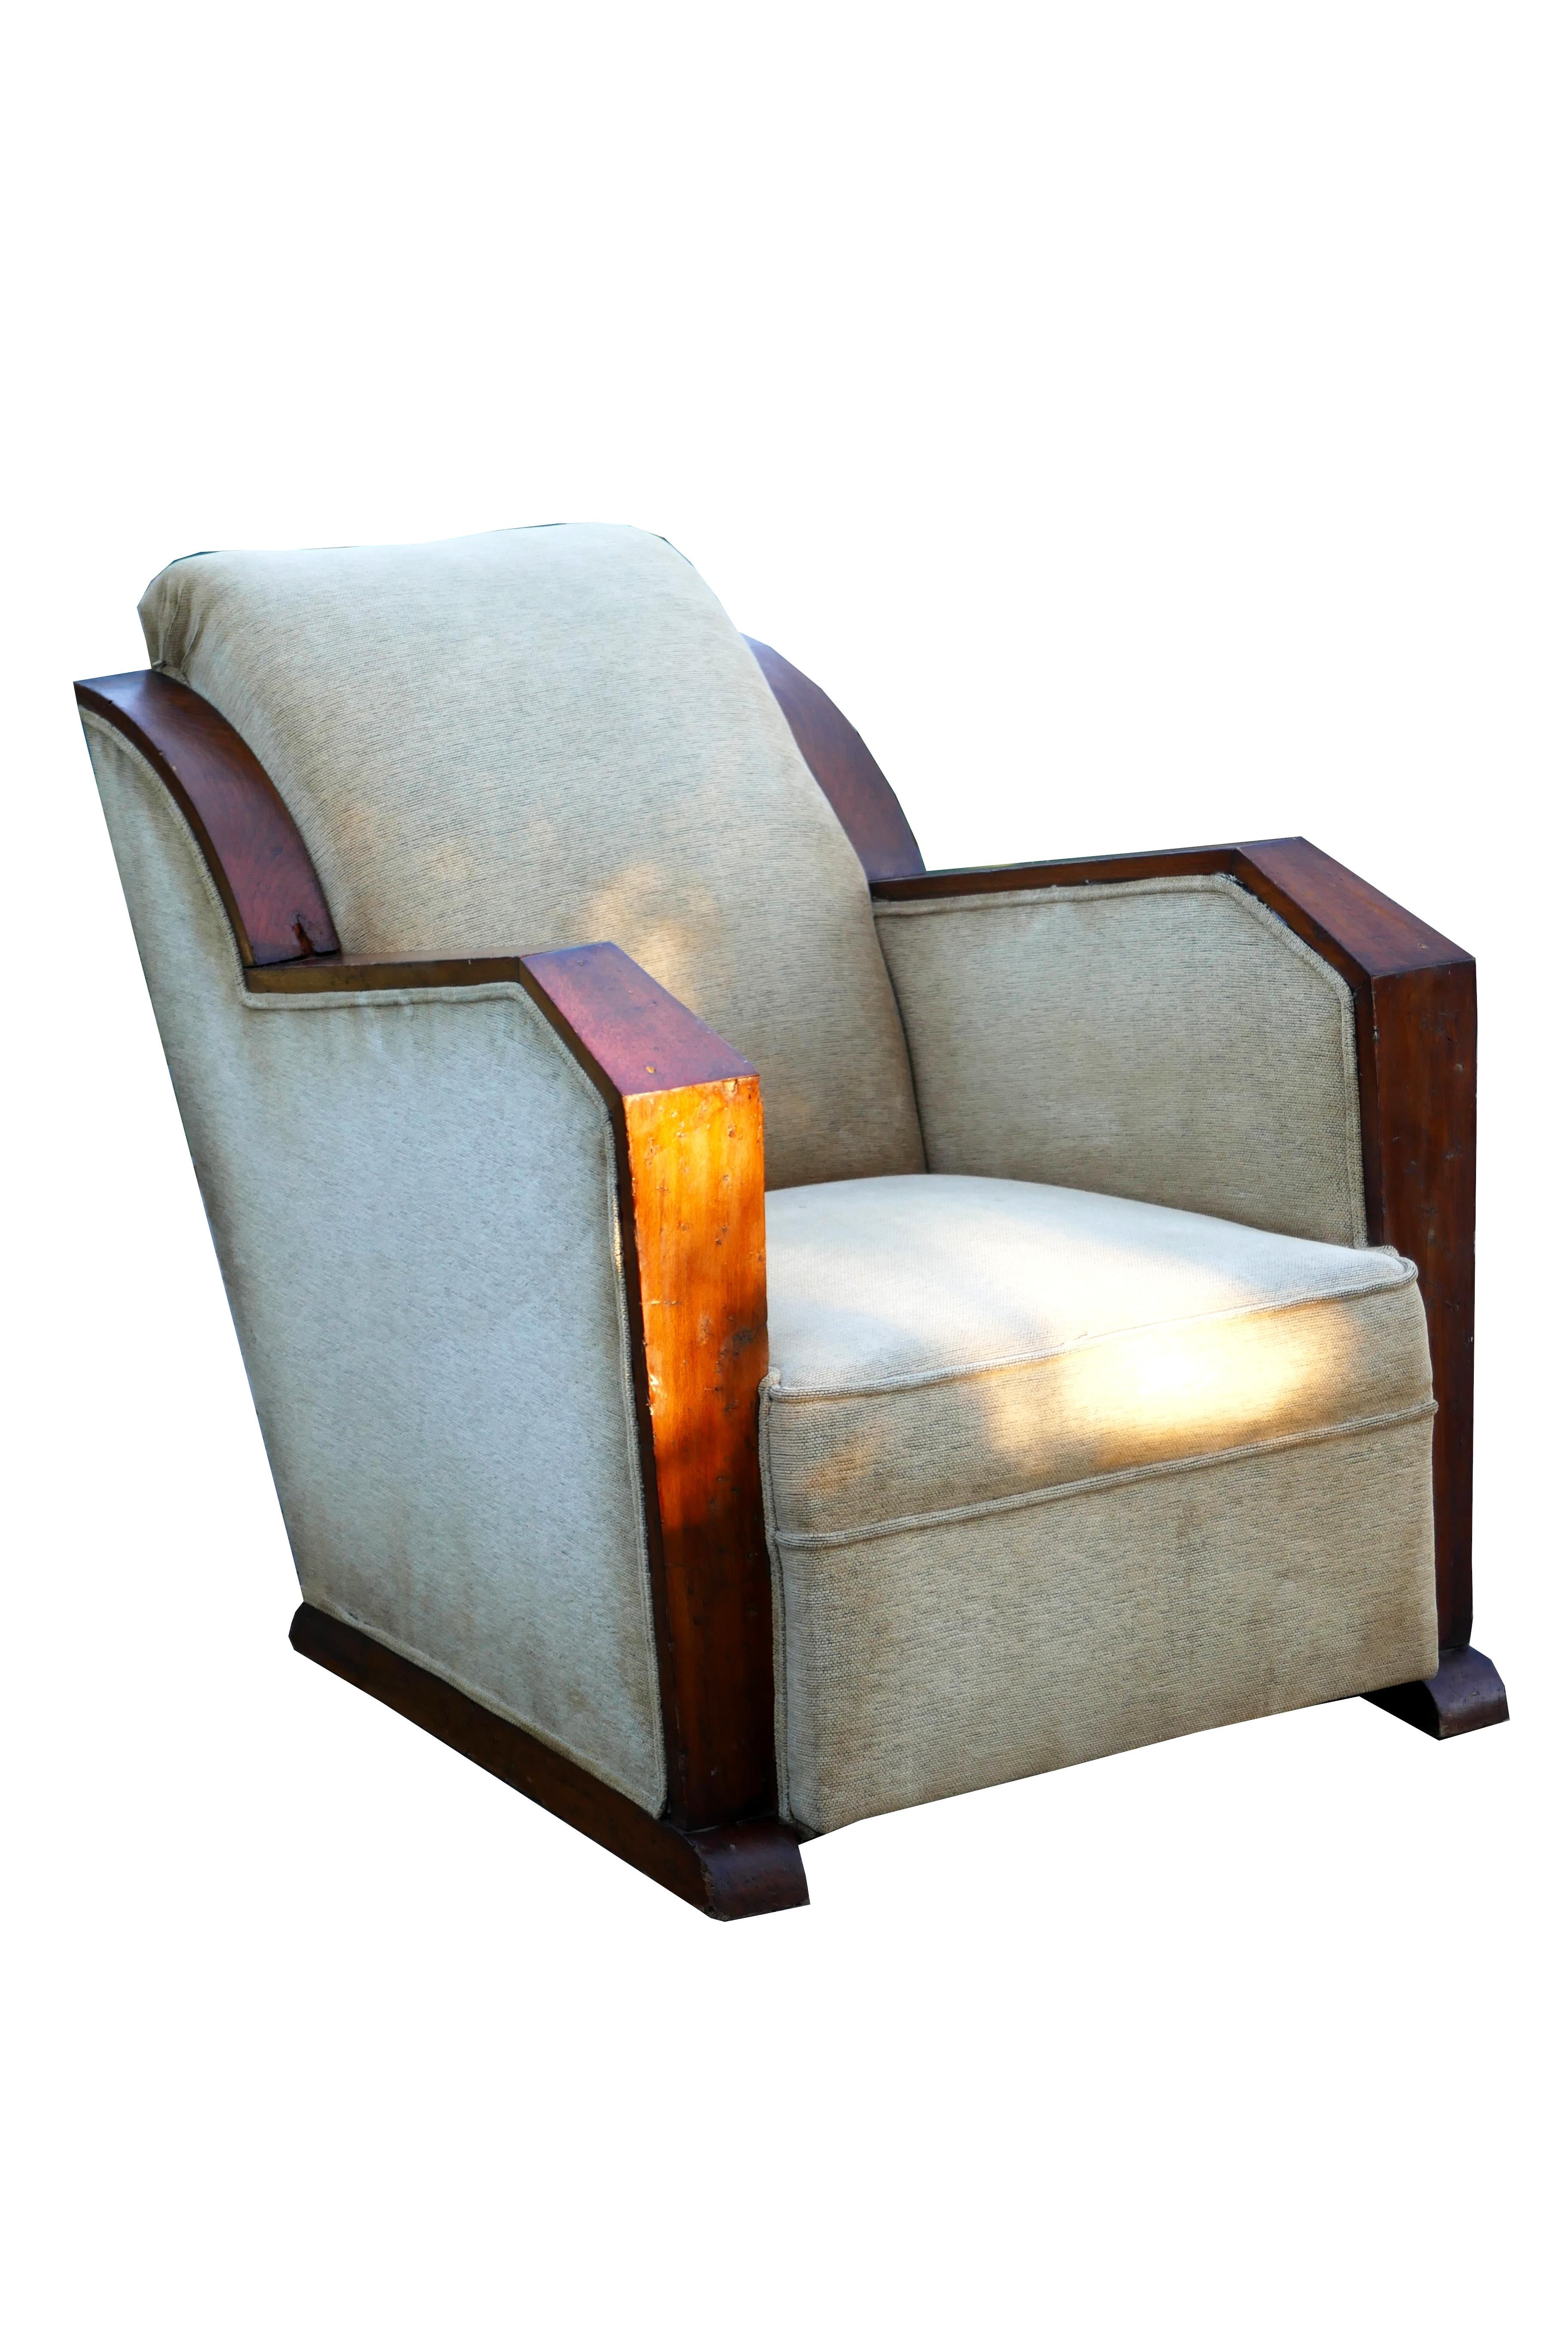 A French Art Deco armchair possible Andre Domin & Marcel Genevrieve for Maison Dominique 1920/30.
Flawless wooden frame and original fabric of the period.
The arms have an outward angle, width 57 cm at the shoulders  and 71 cm in the seat.
No